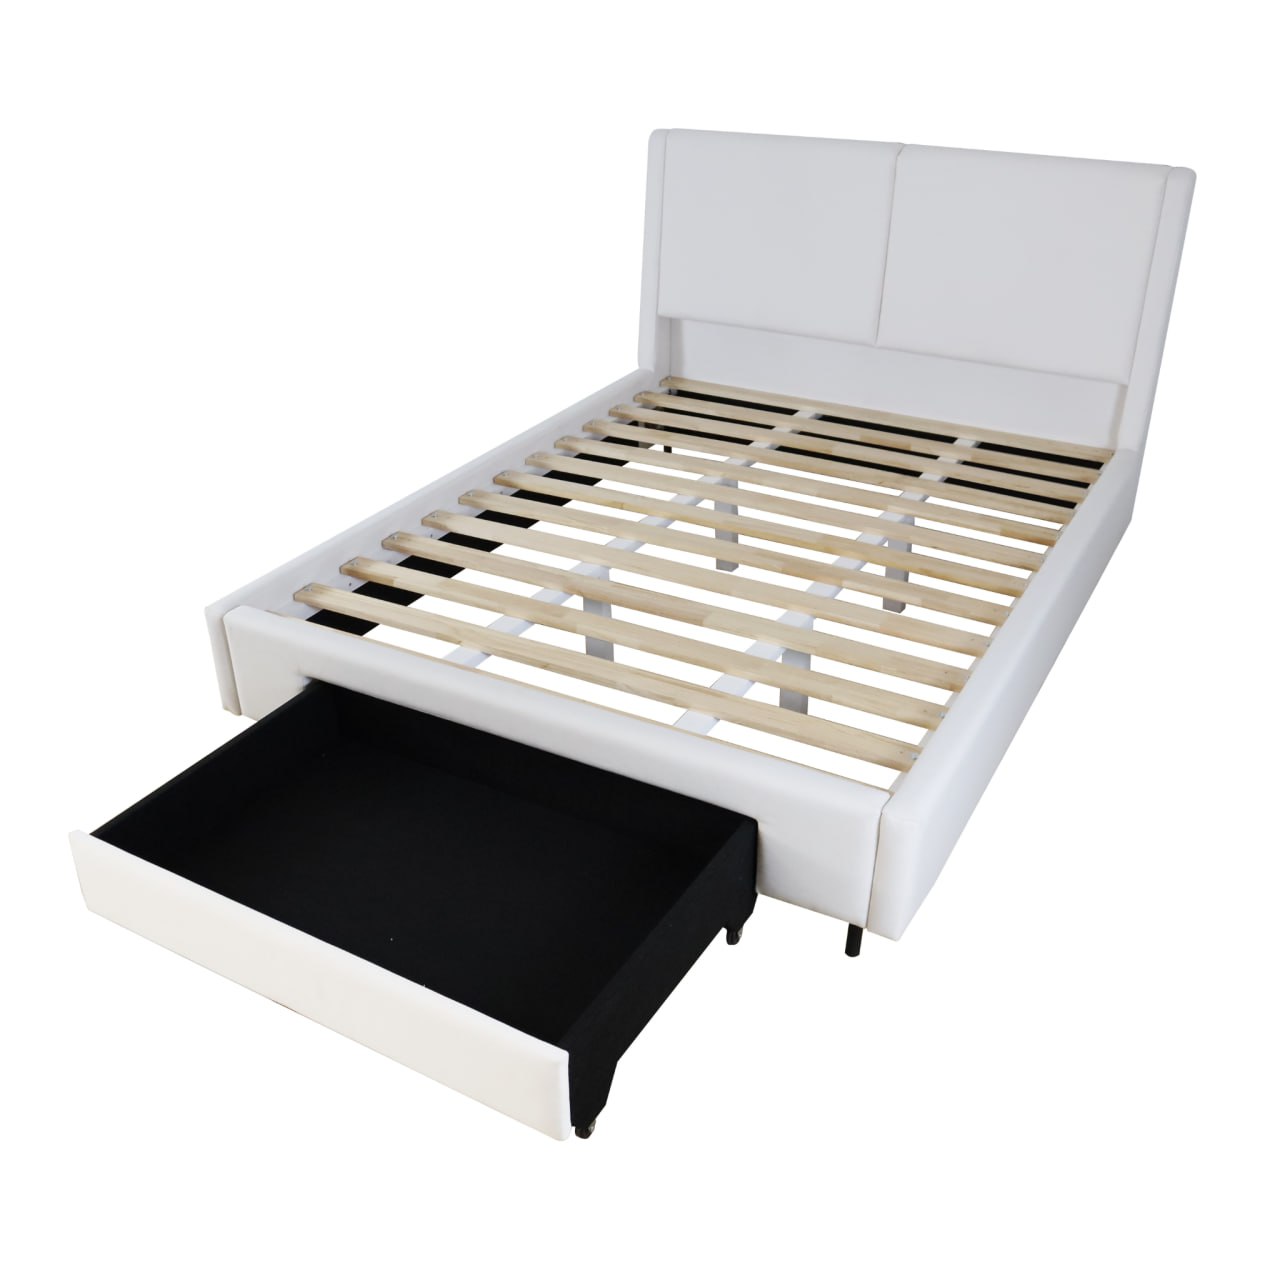 KRIZZY Bedframe with Drawer AF Home